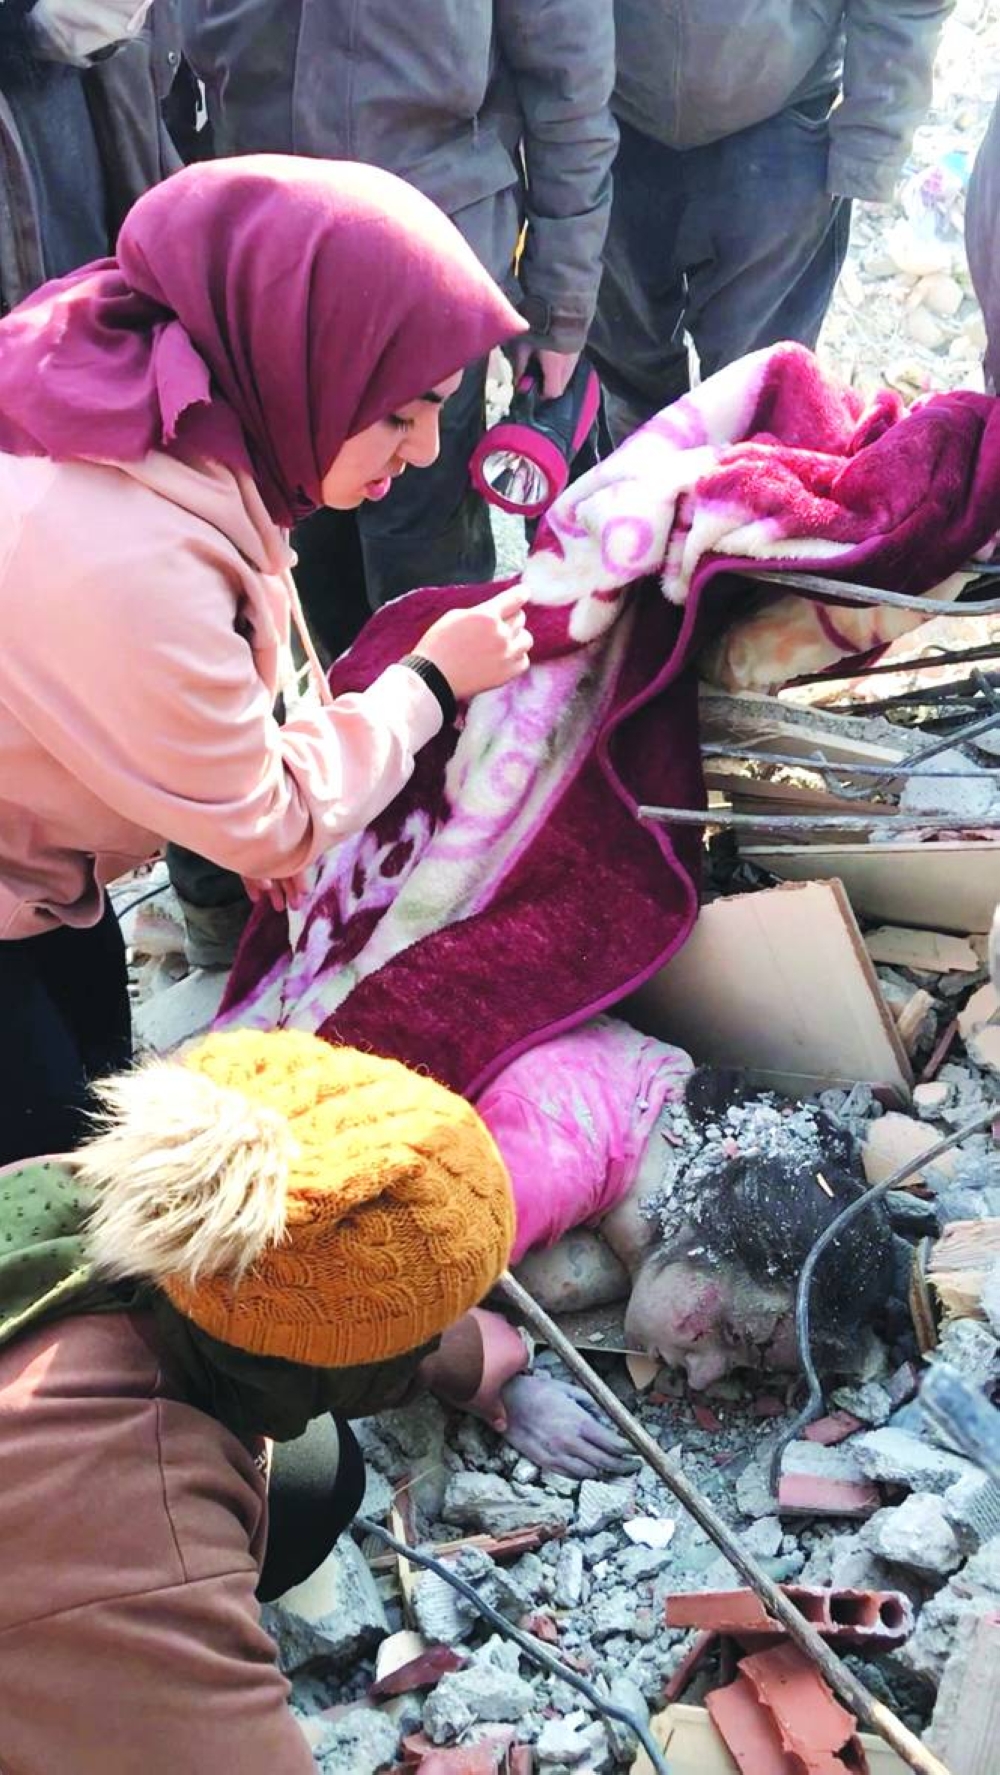 Miracle Rescues On Day Turkiye Syria Quake Death Toll Tops 25000 Gulf Times